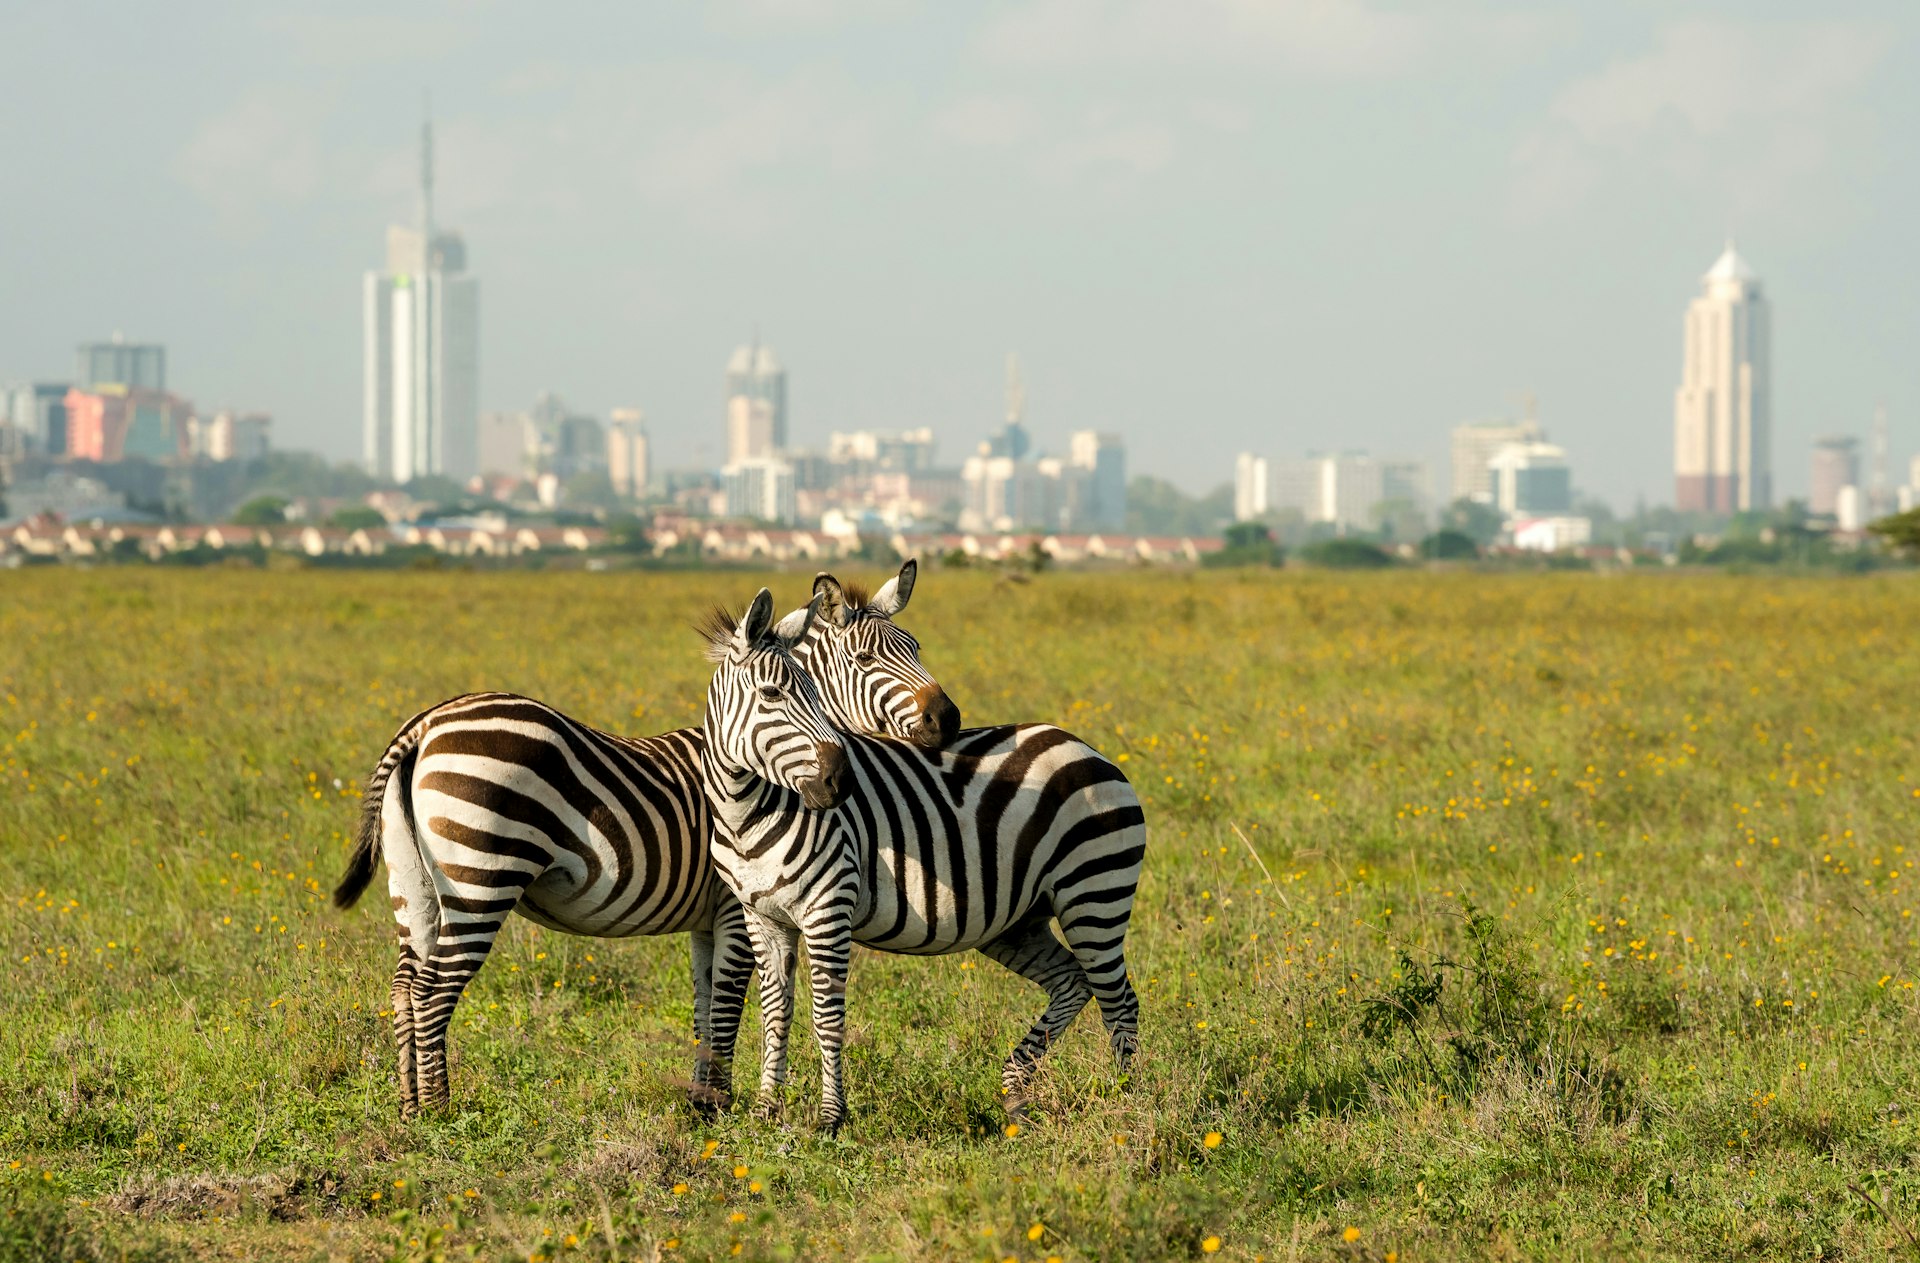 Two zebra stand together in a national park with tall buildings of a city skyline in the distance